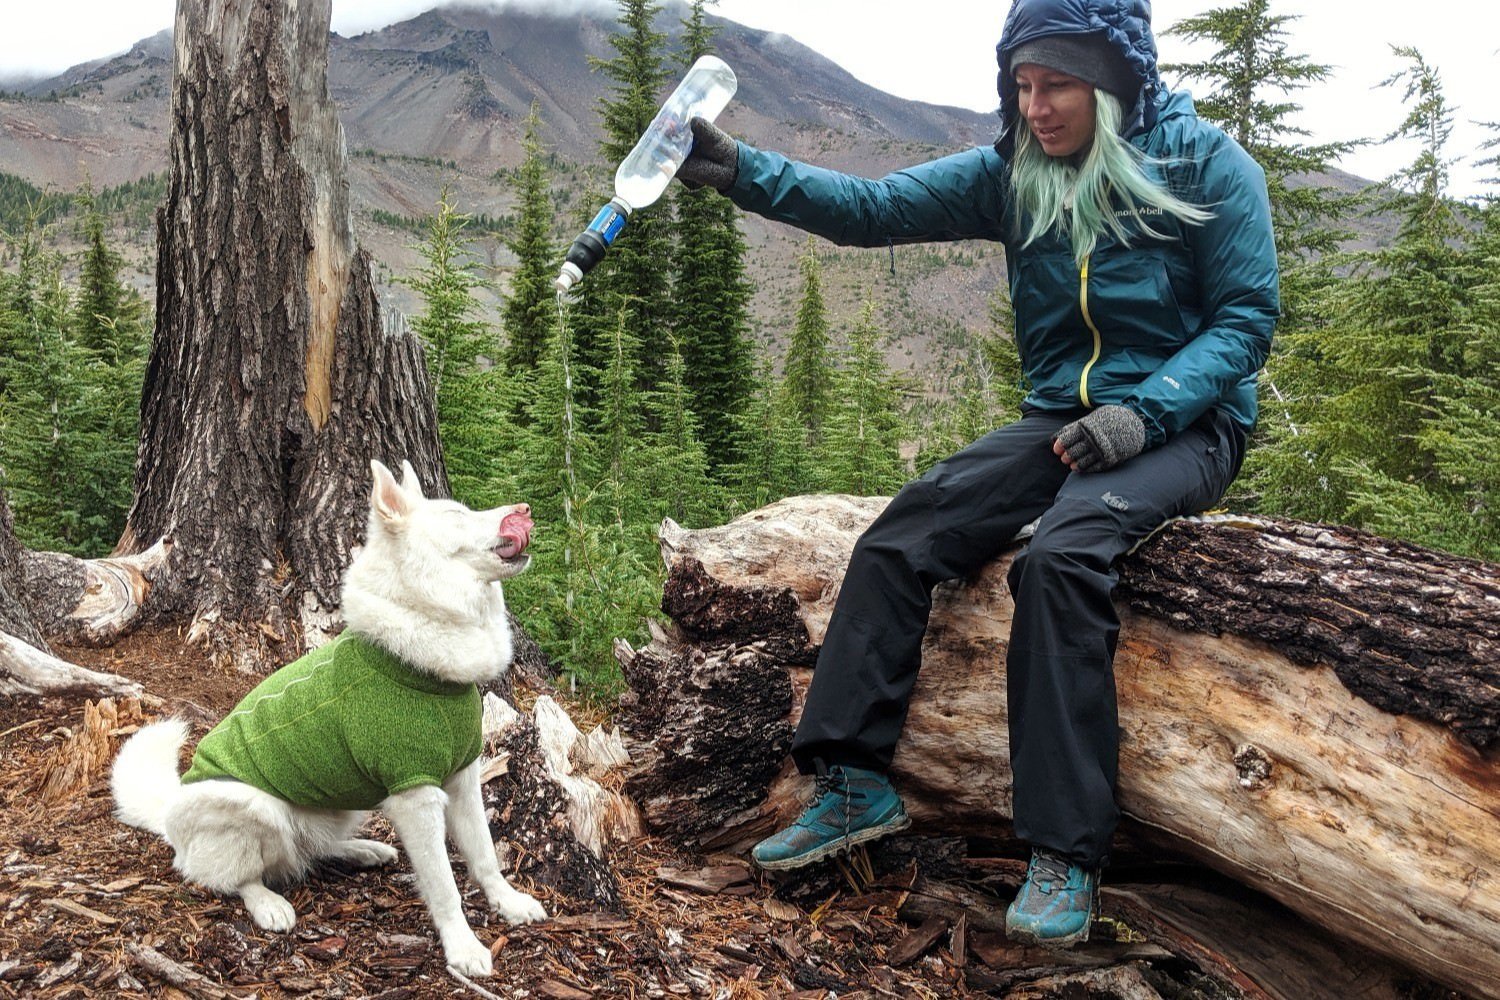 A hiker giver her dog a drink of water from a water bottle